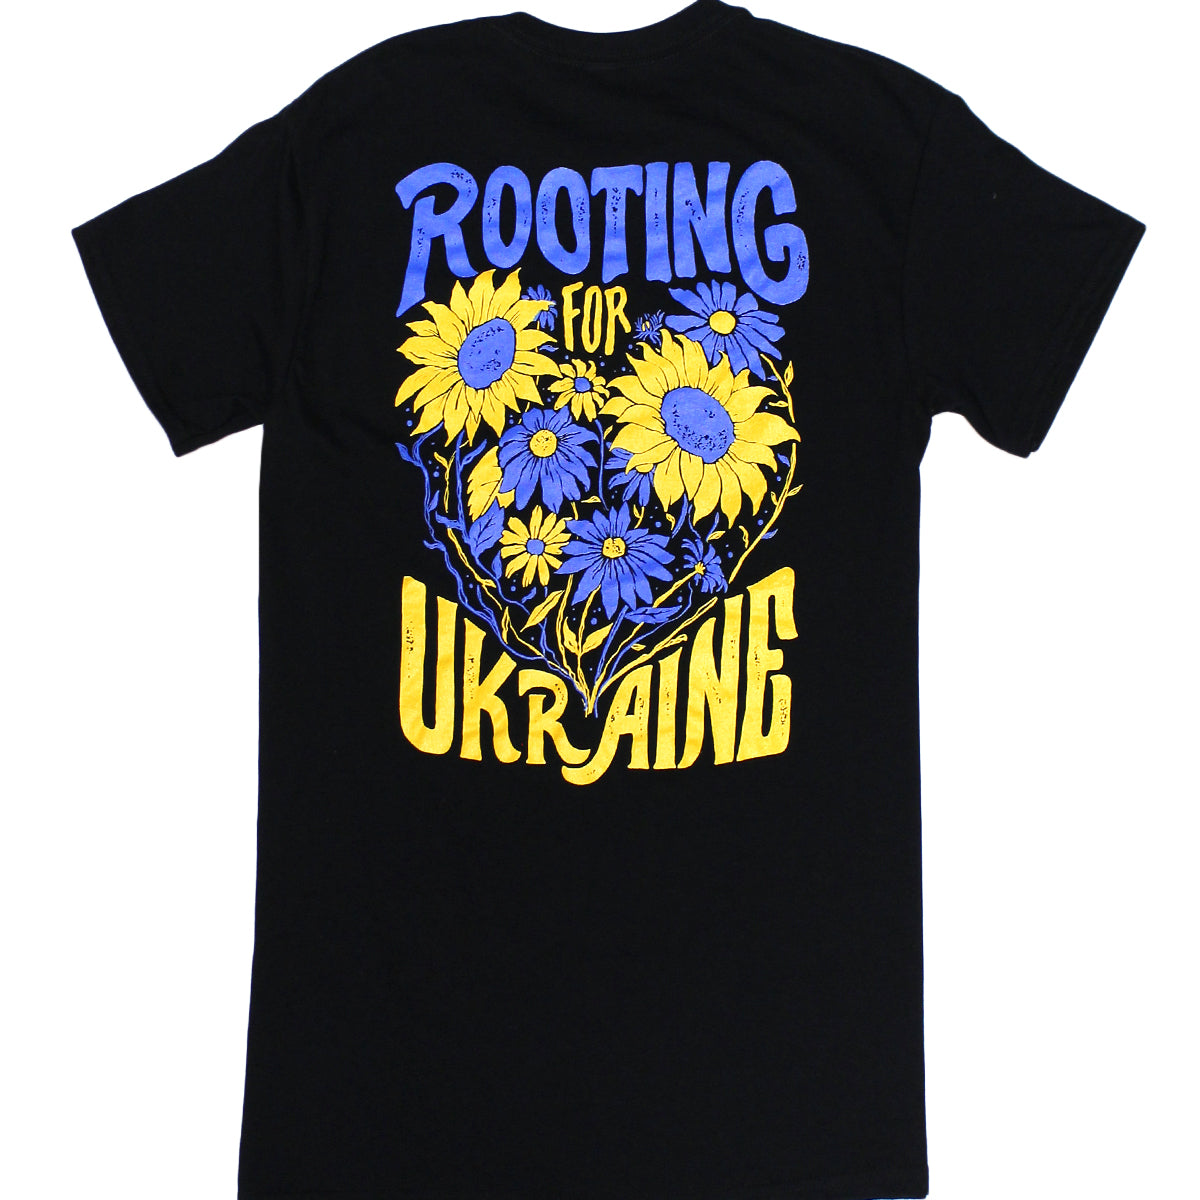 Rooting For Ukraine (Black) / Shirt - Route One Apparel